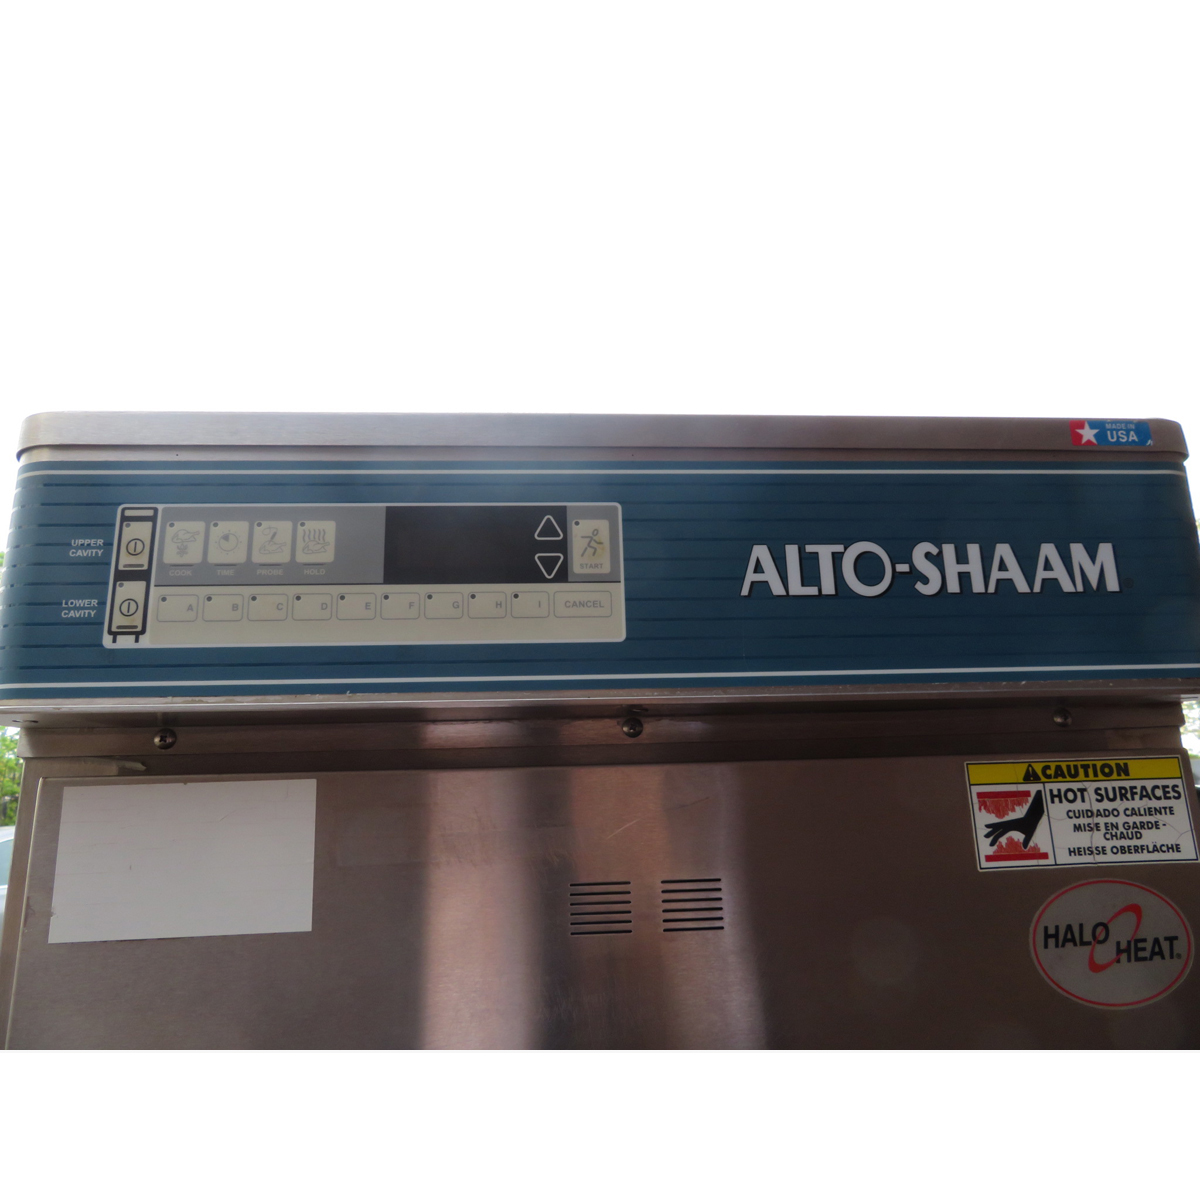 Alto Shaam 1200-TH/III Electronic Cook & Hold Oven, Used Very Good Condition image 4